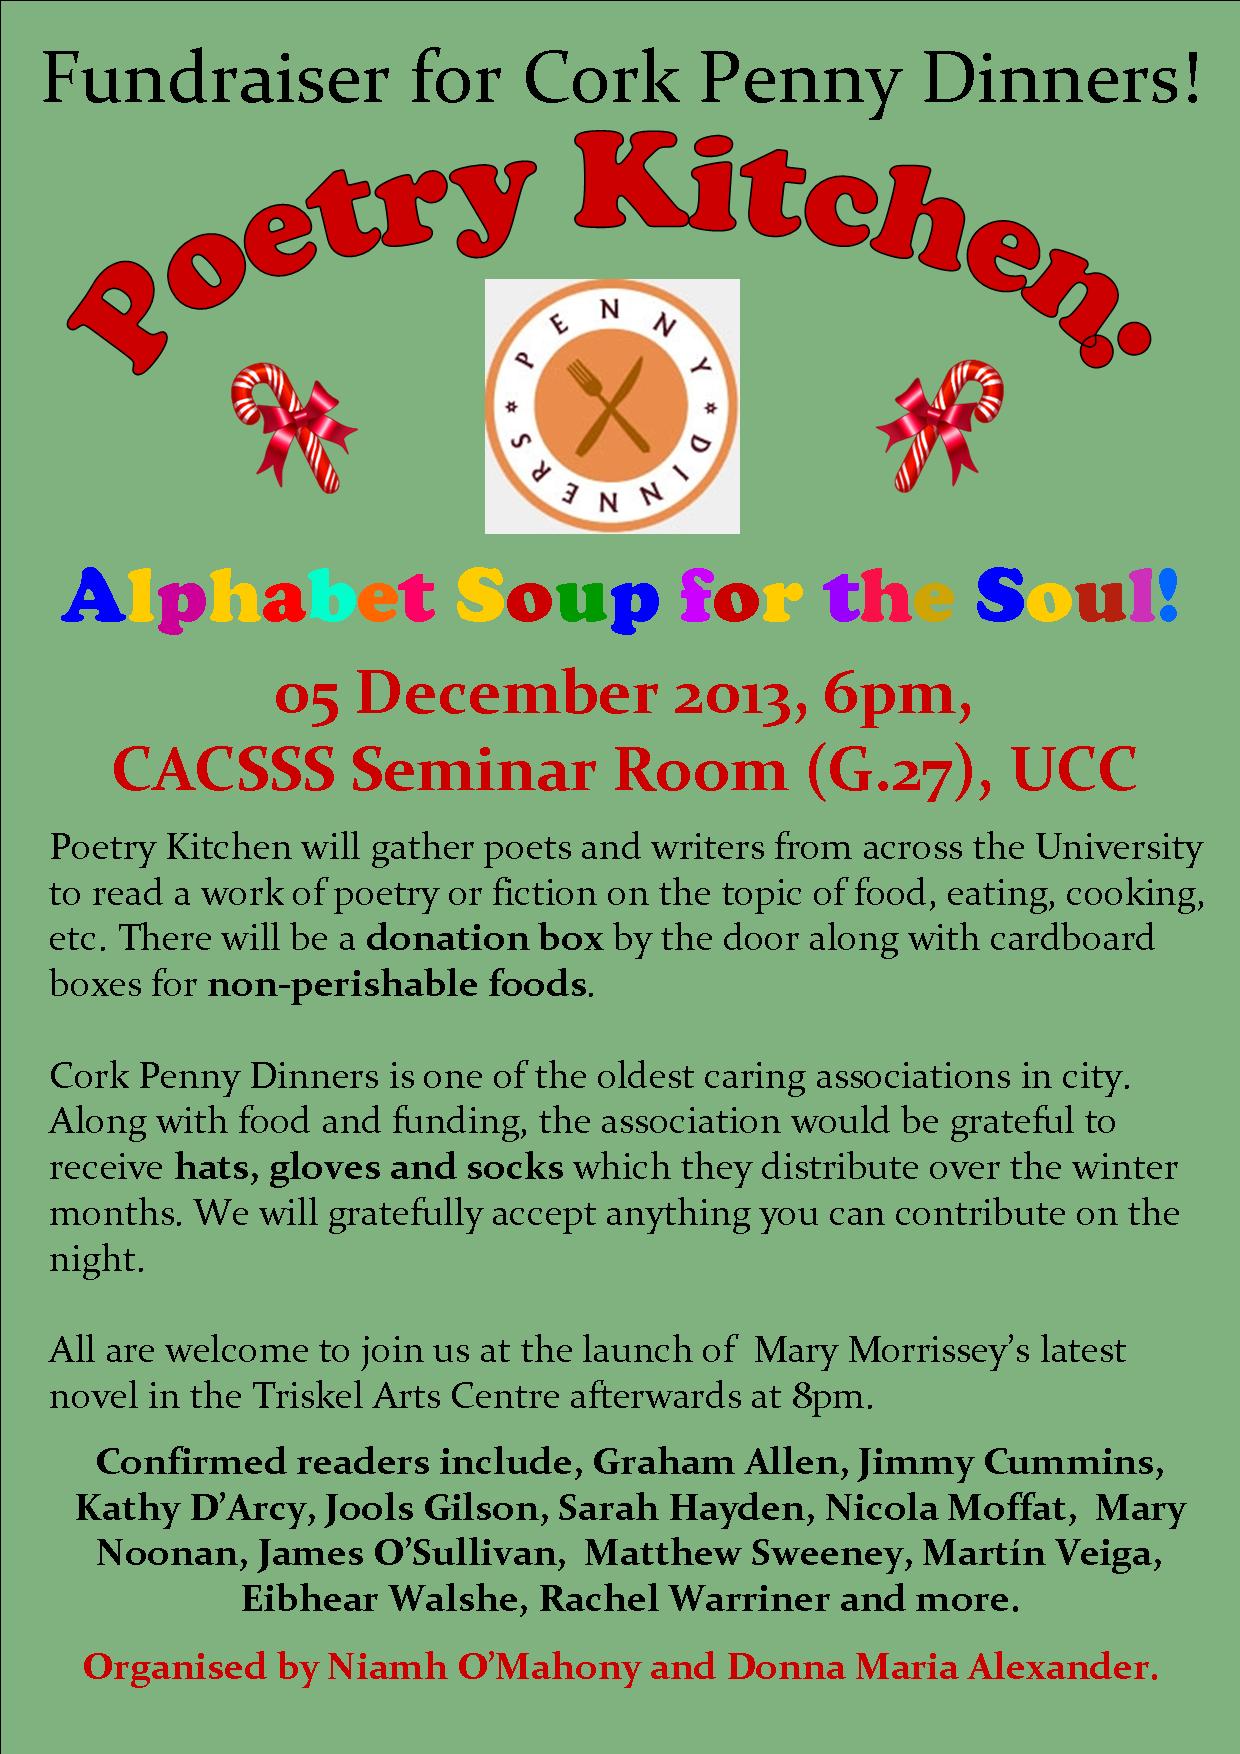 Poetry Kitchen - fundraiser for Cork Penny Dinners